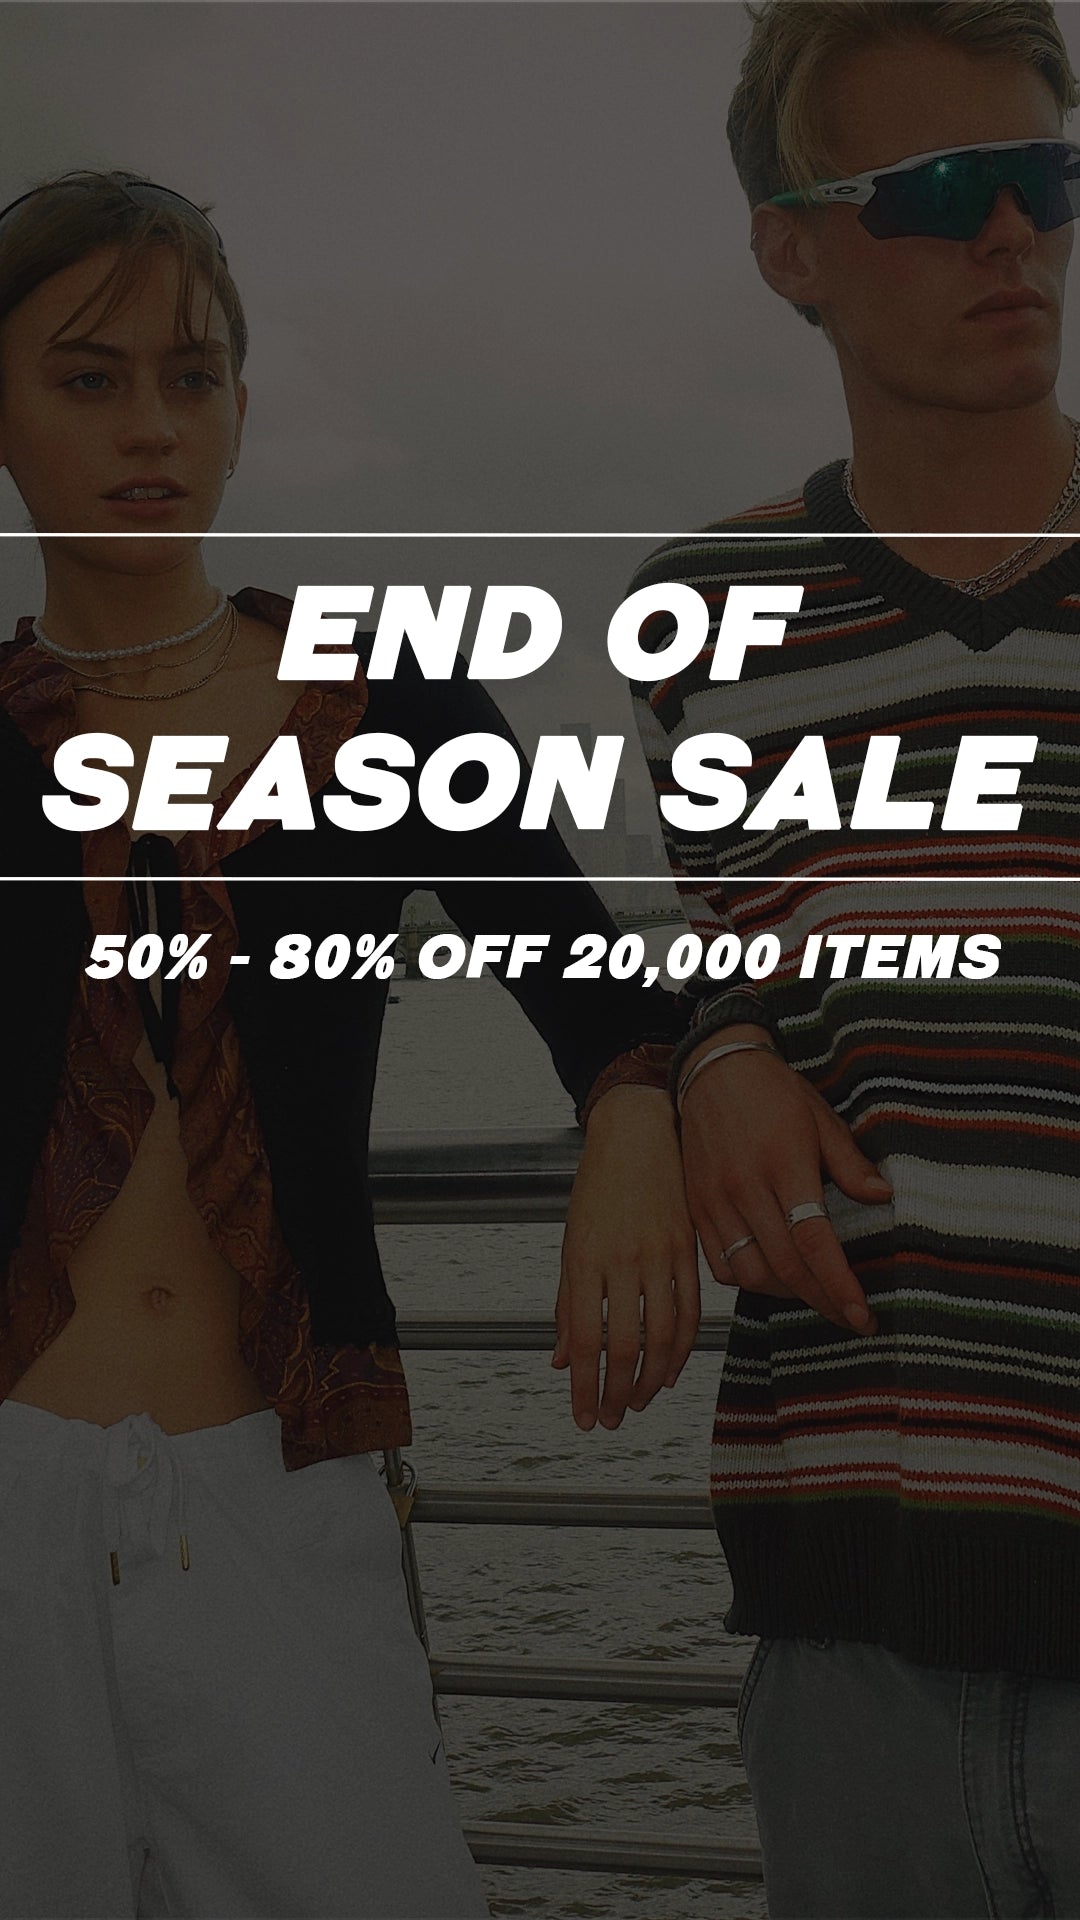 UP TO 80% OFF VINTAGE CLOTHING